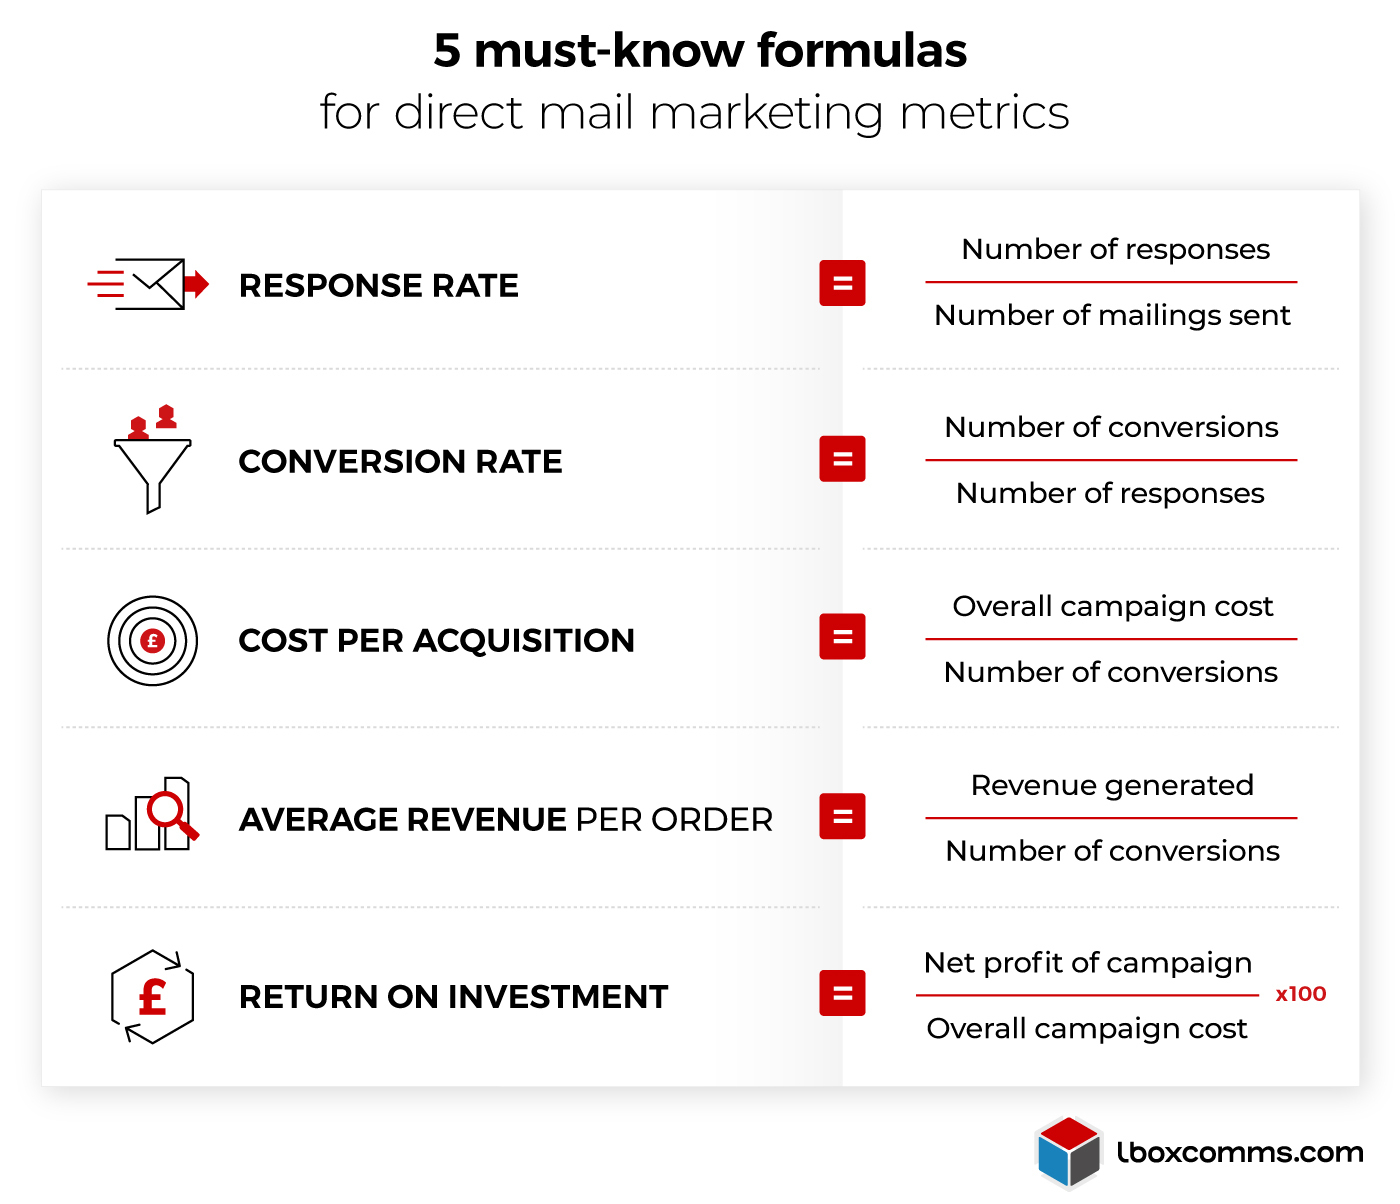 5 important formulas to calculate direct mail marketing success rates